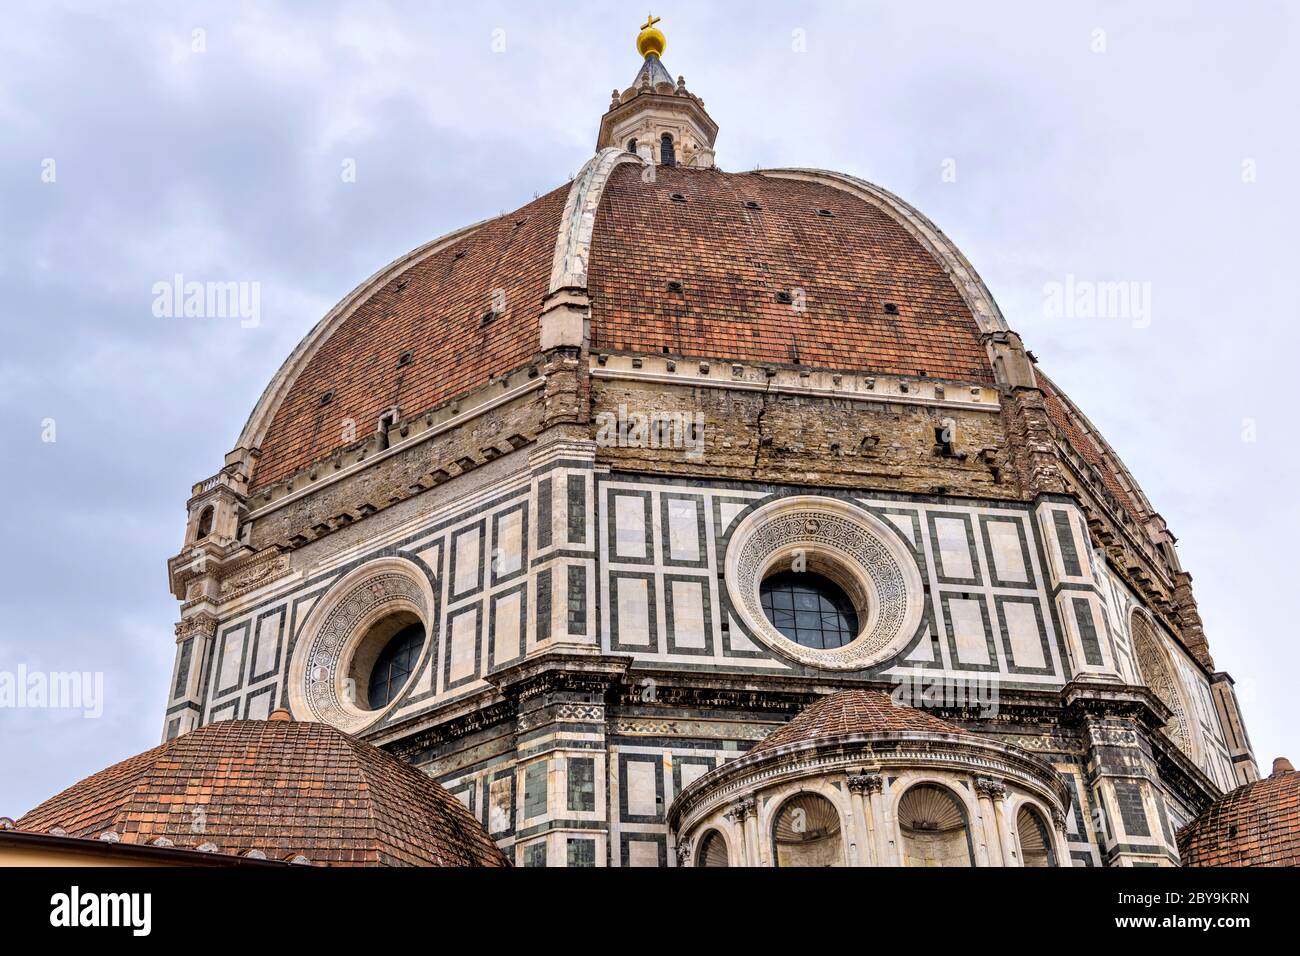 Brunelleschi's Dome - A close-up low-angle view of the 15th-century dome of the Florence Cathedral. Florence, Tuscany, Italy. Stock Photo